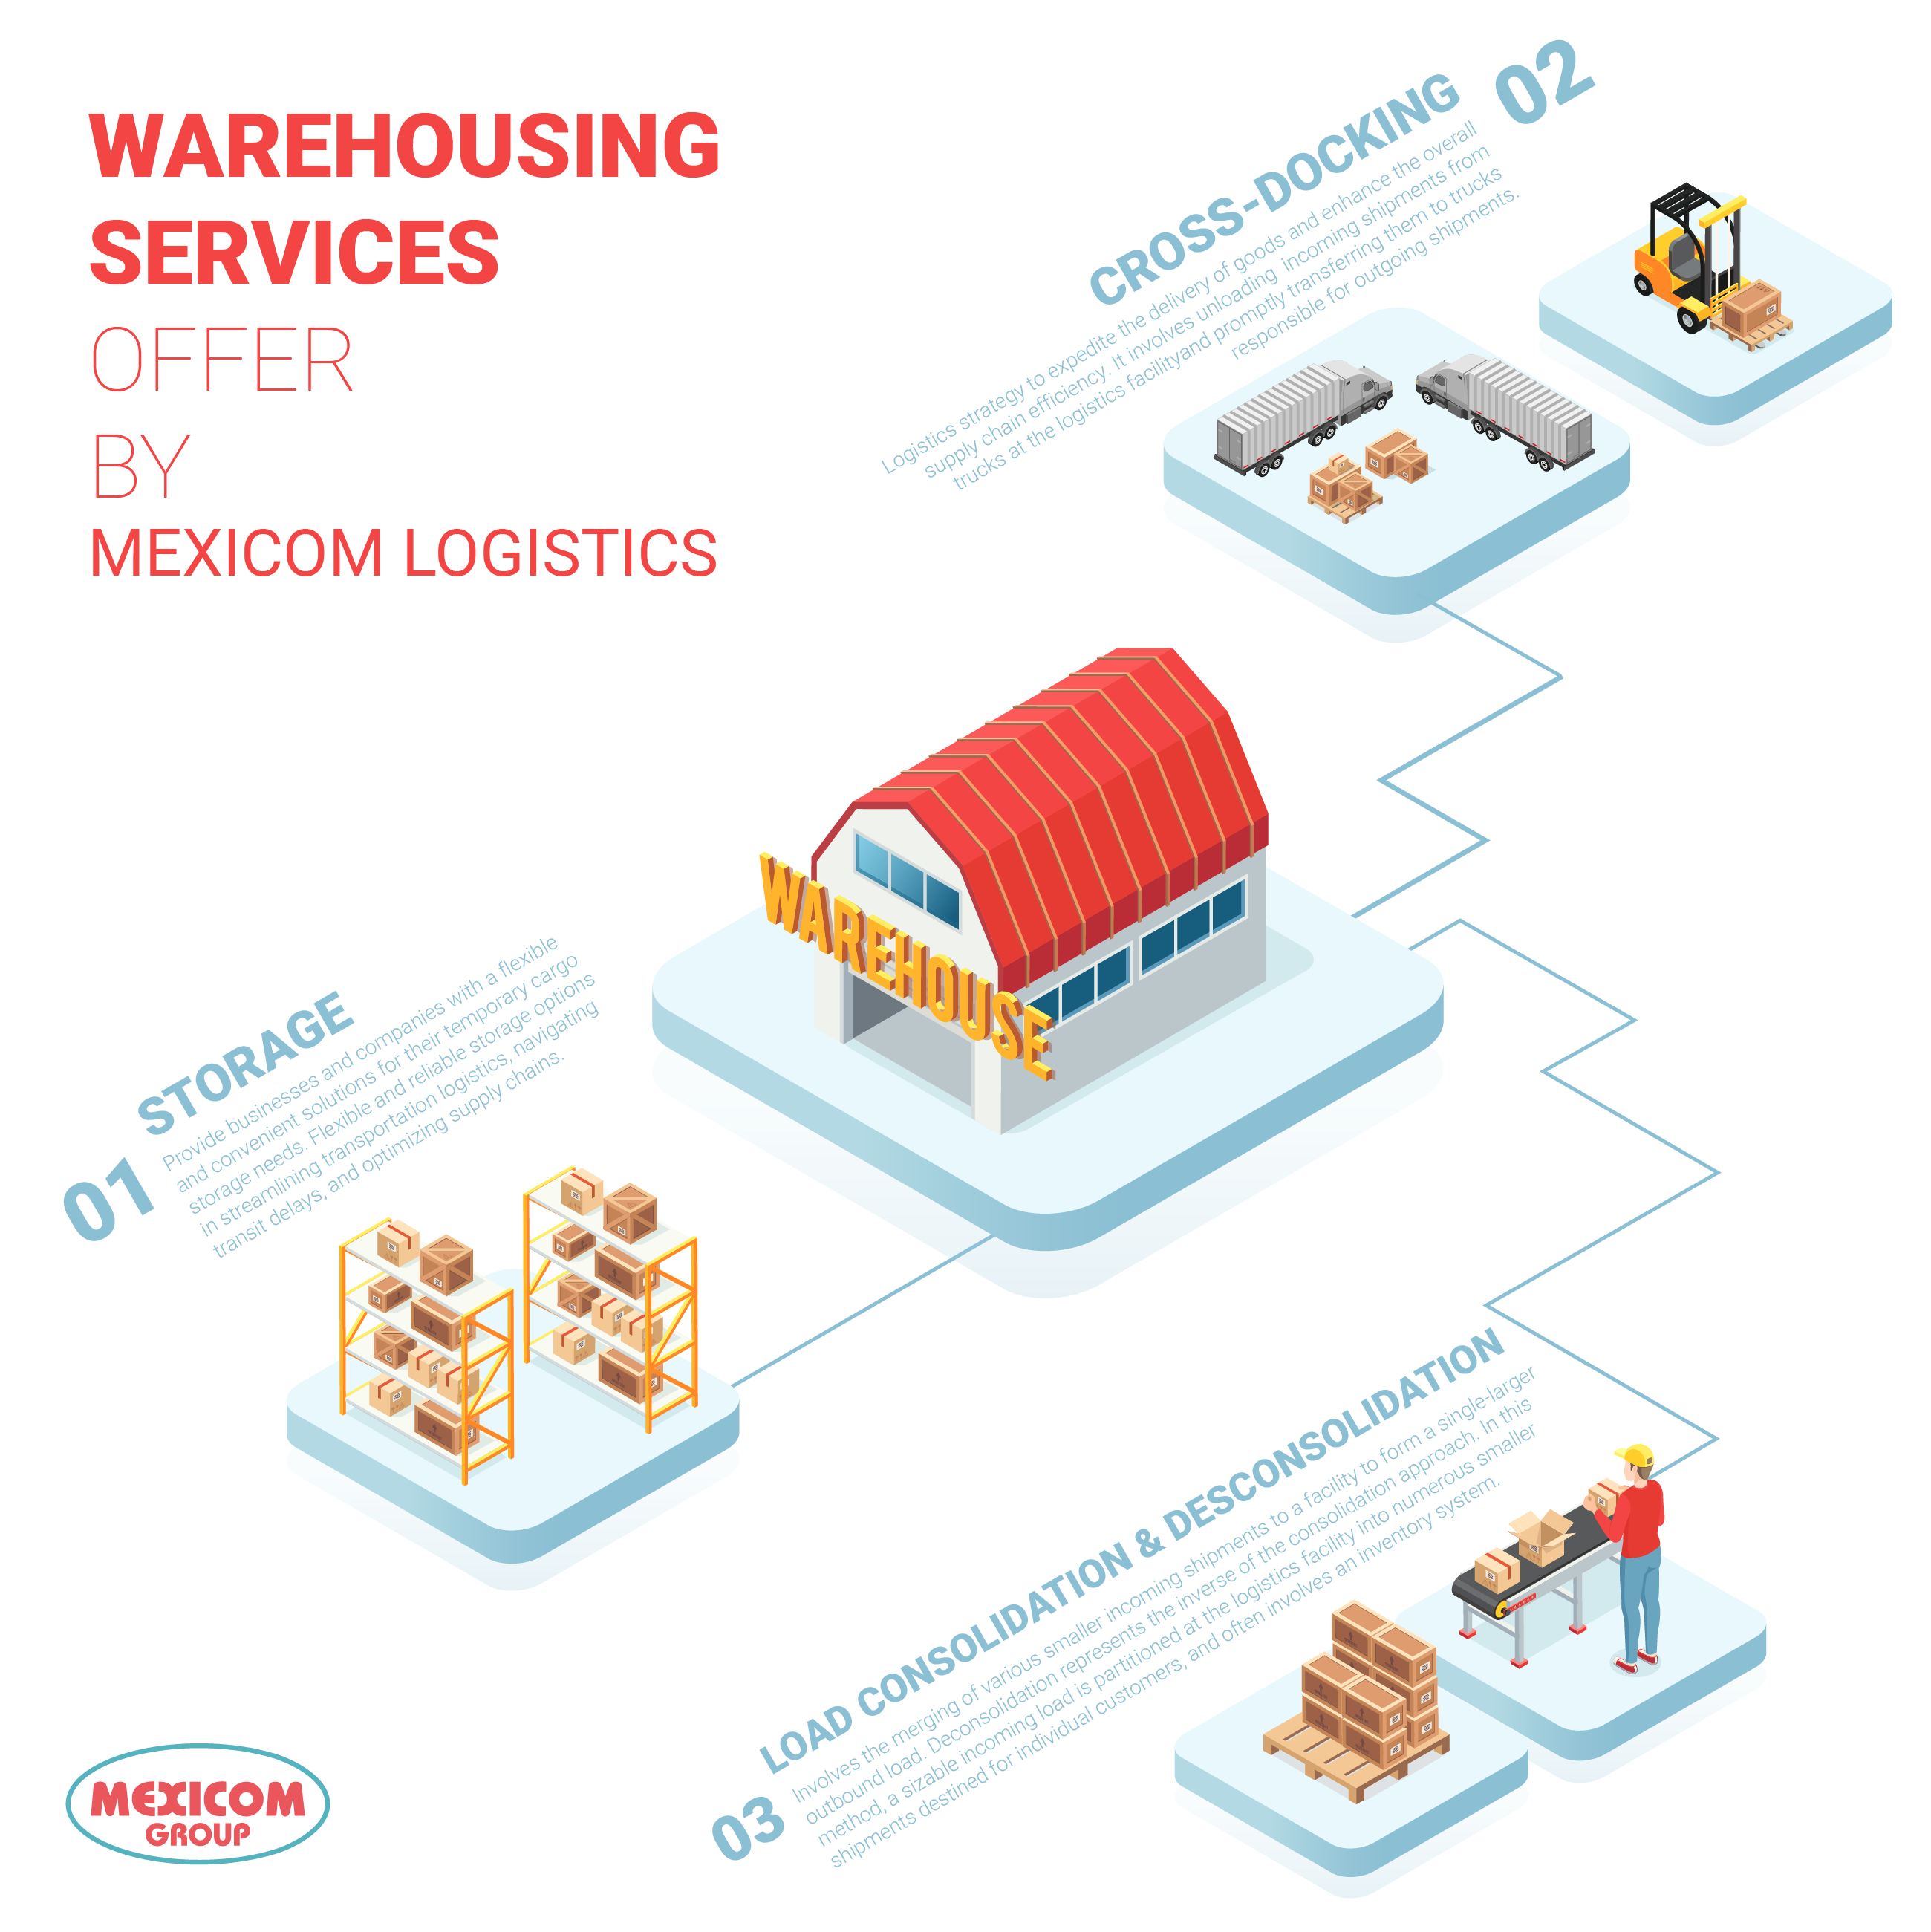 warehouse is defined as a facility dedicated to the storage